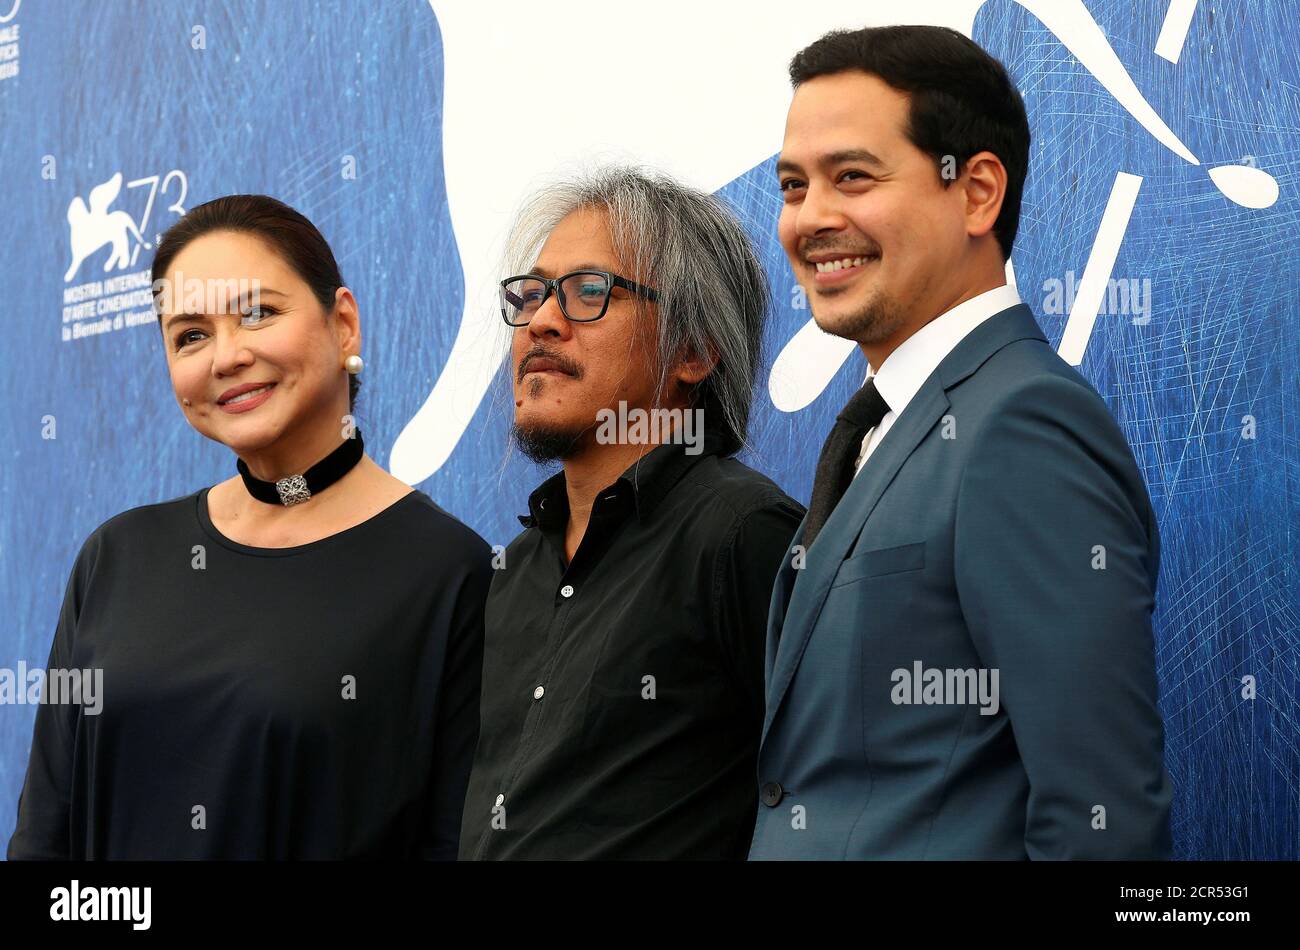 Director Lav Diaz (C) poses with actress Charo Santos-Concio (L) and actor John Lloyd Cruz (R) as they attend the photo call for the movie 'Ang Babaeng Humayo' (The Woman Who Left) at the 73rd Venice Film Festival in Venice, Italy September 9, 2016. REUTERS/Alessandro Bianchi Stock Photo